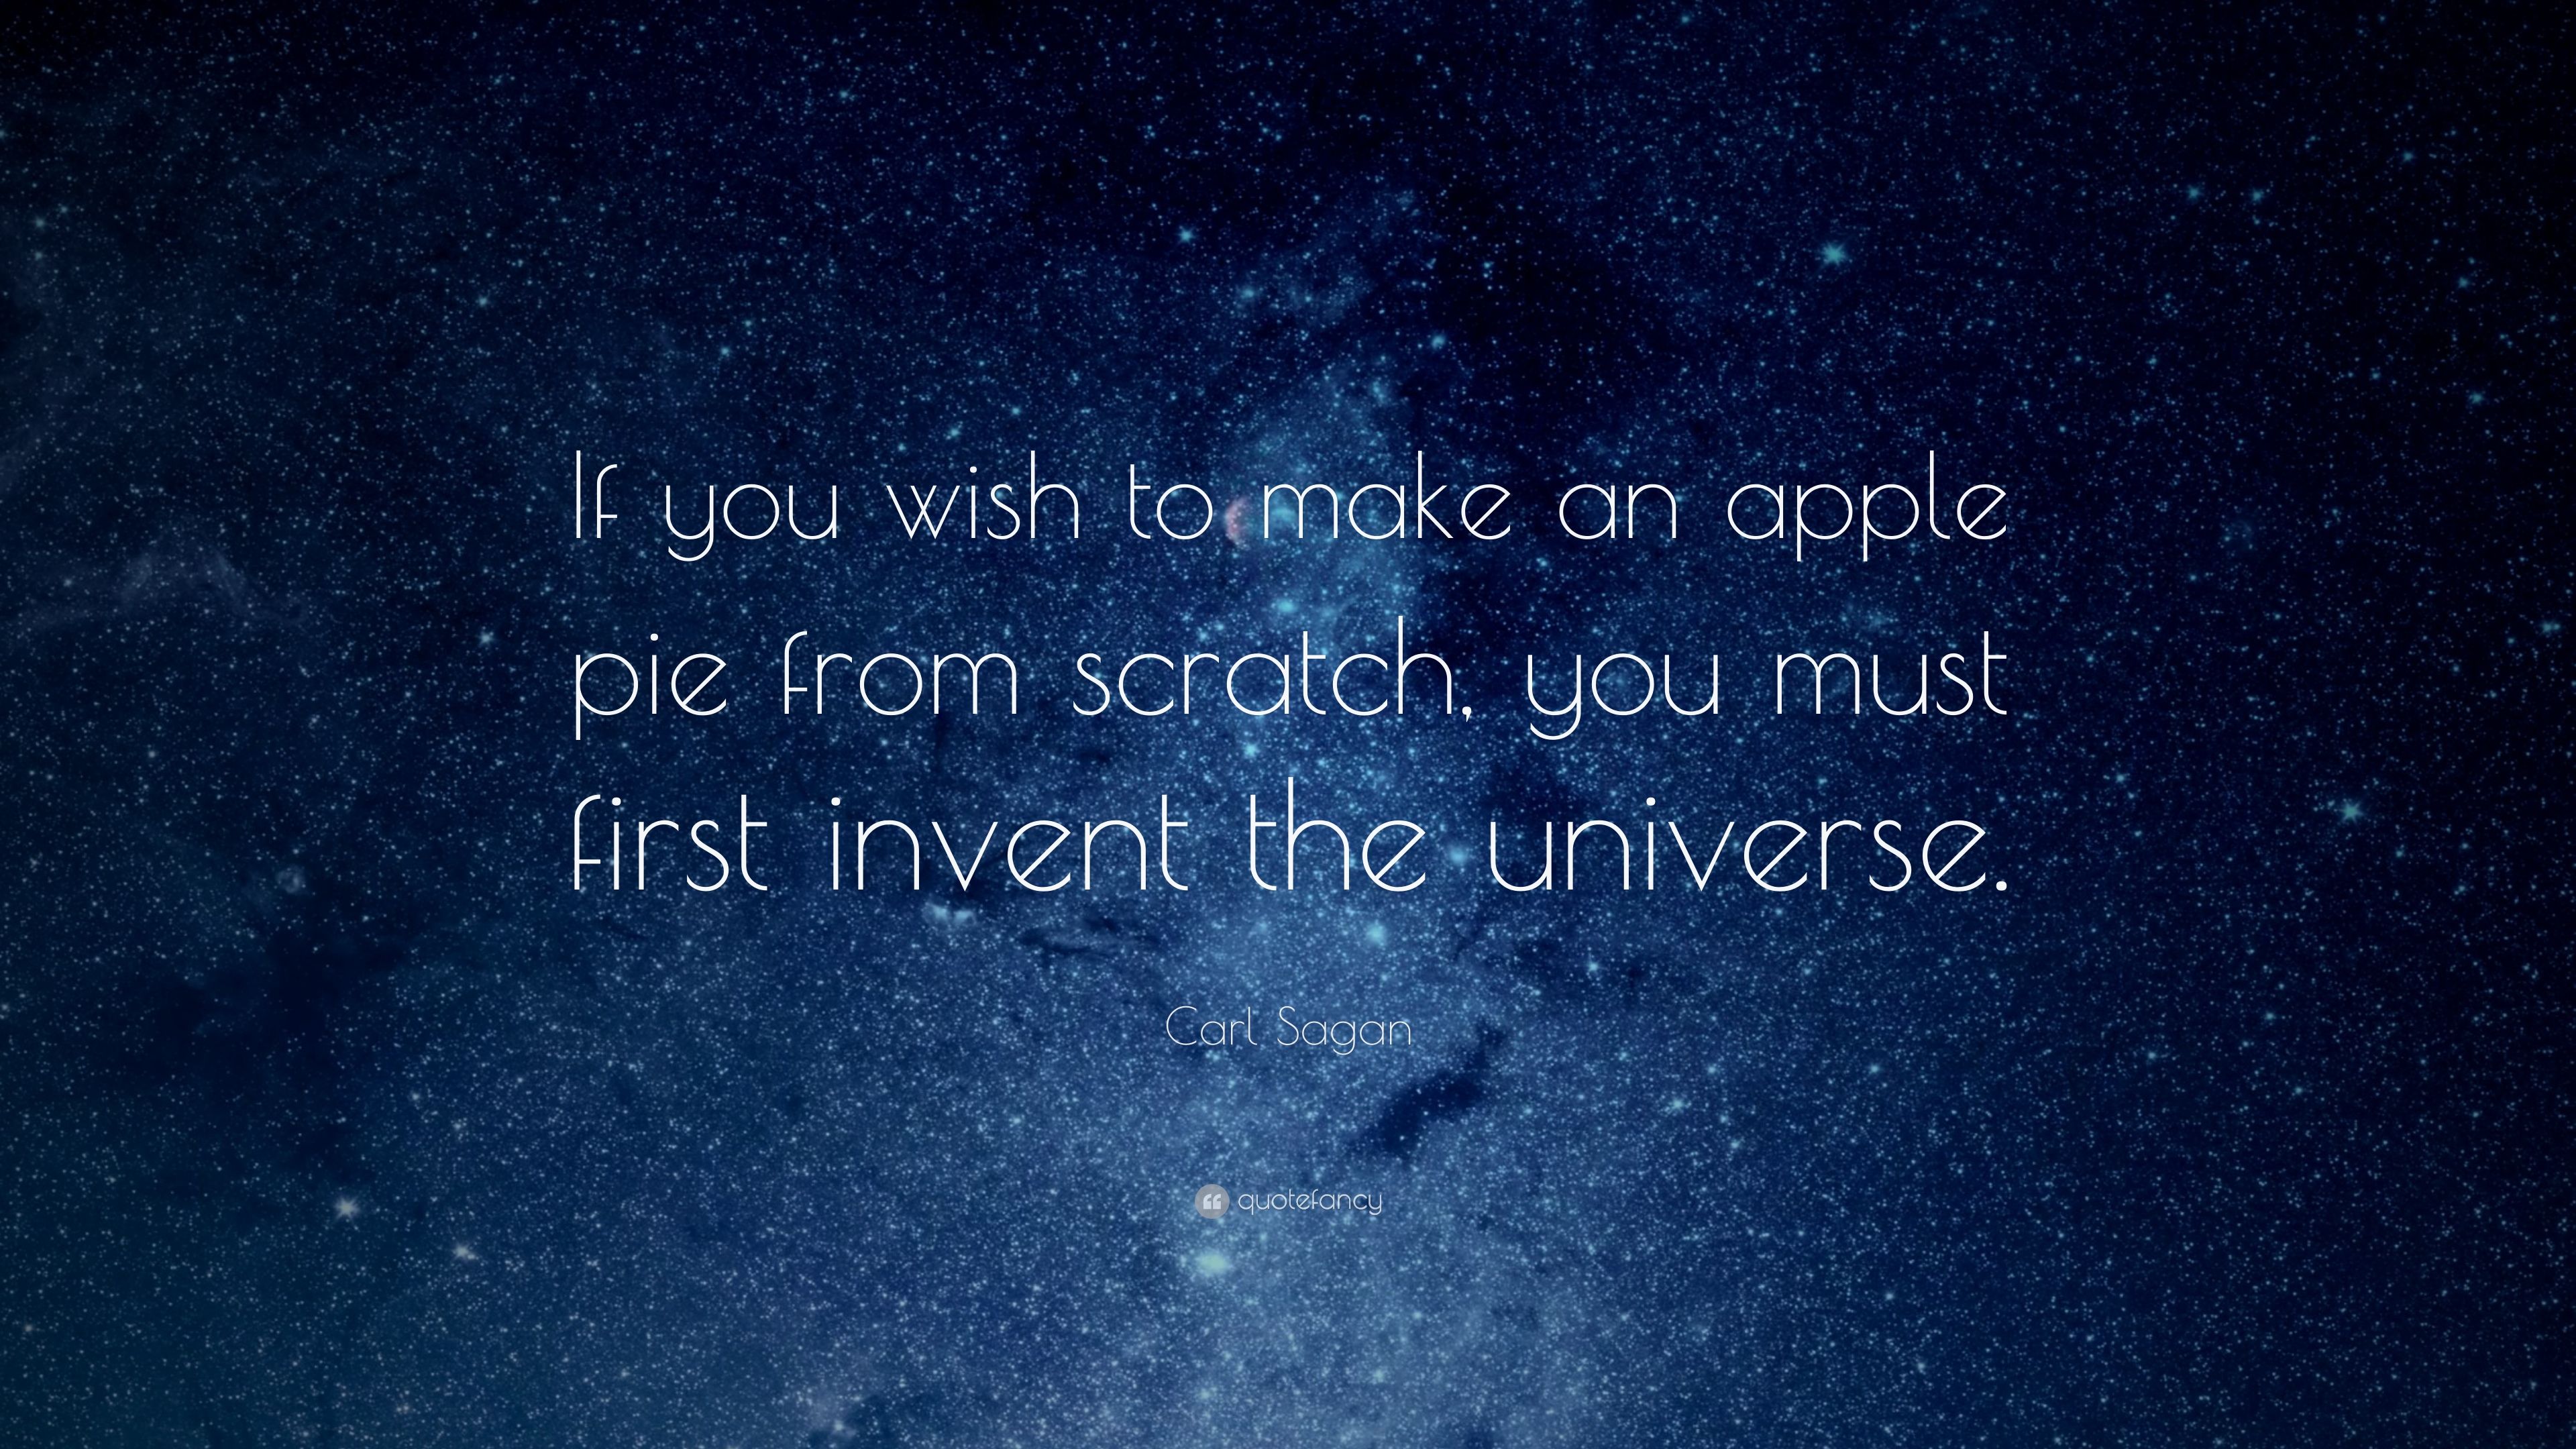 Carl Sagan Quote: “If you wish to make an apple pie from scratch